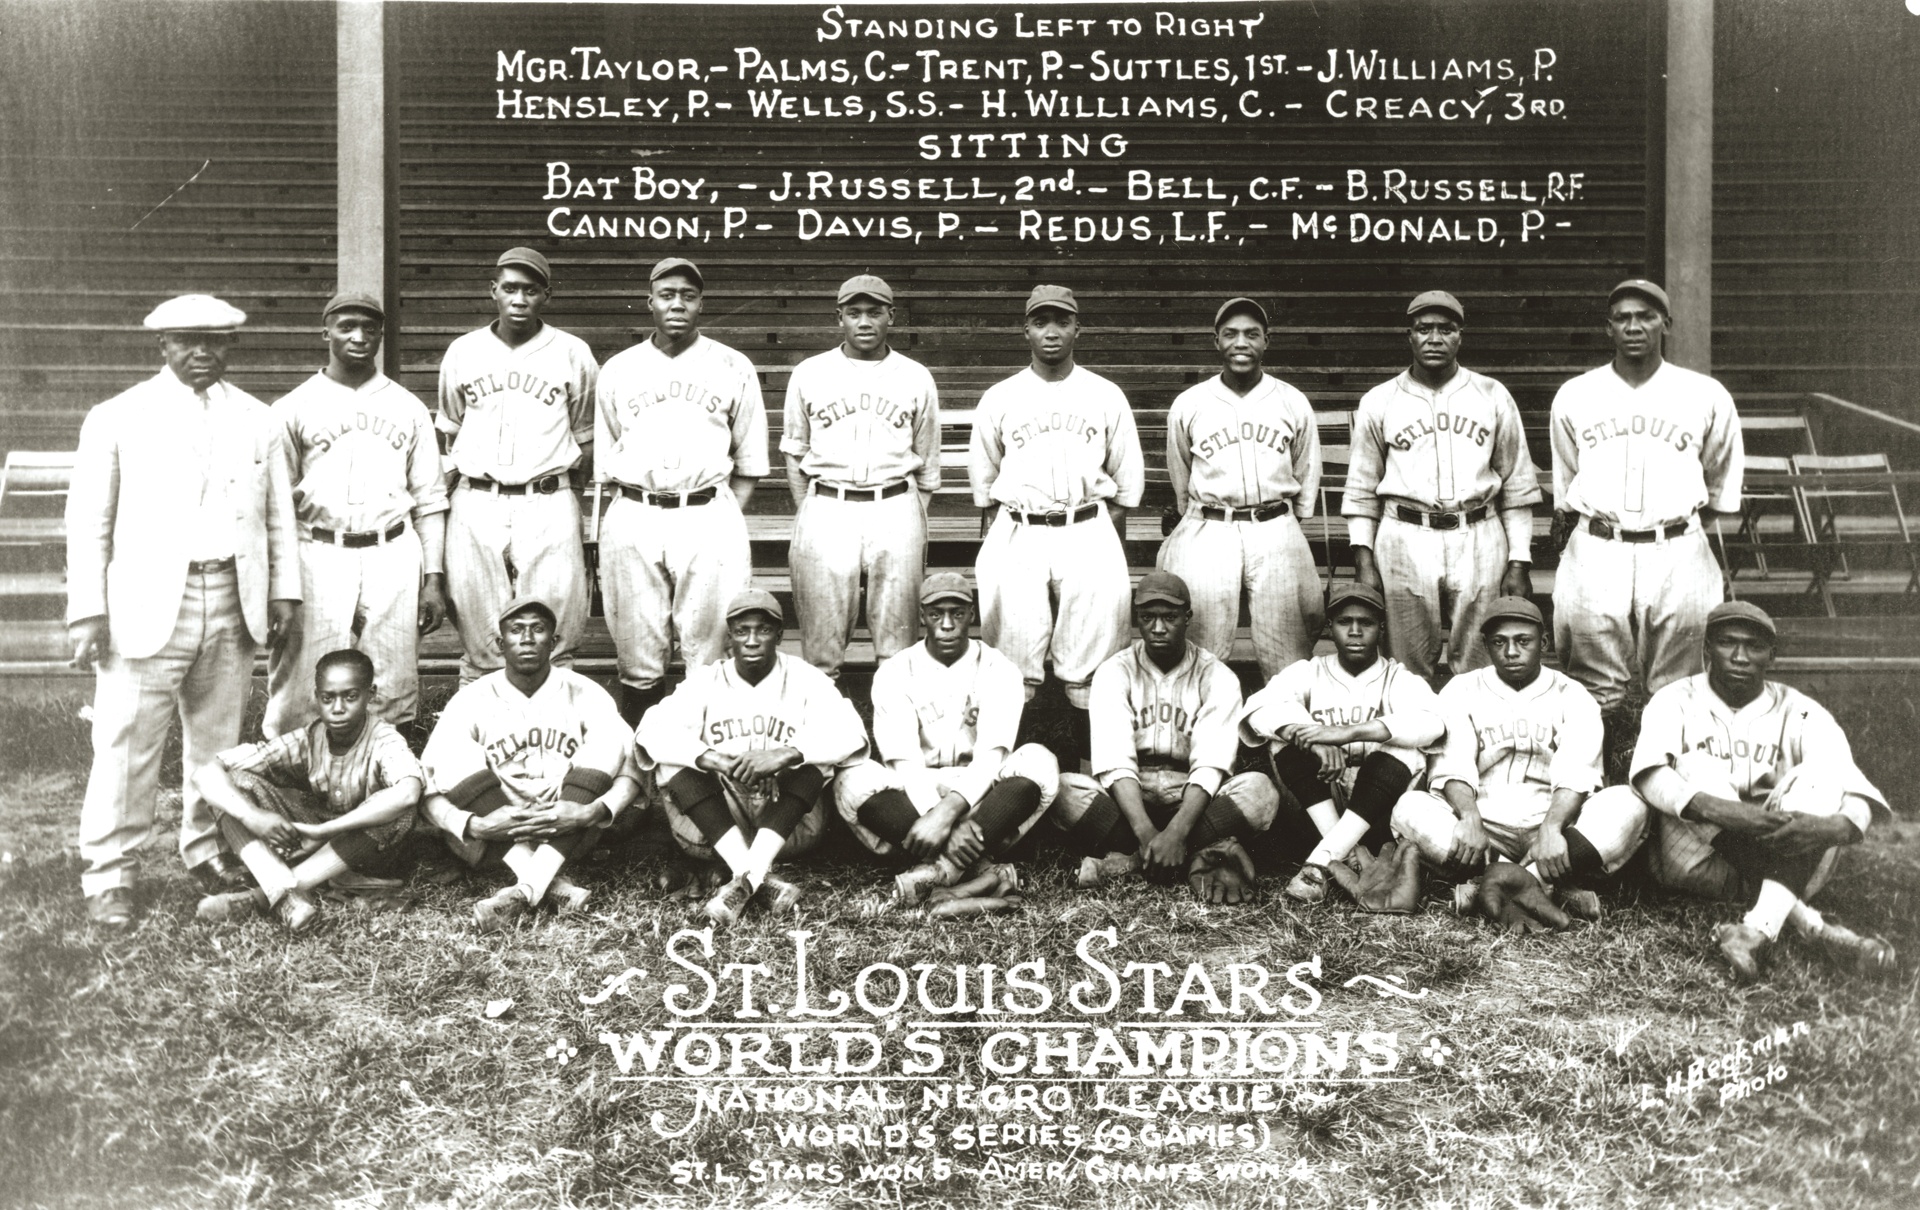 How the legacy of the St. Louis Stars is being kept alive